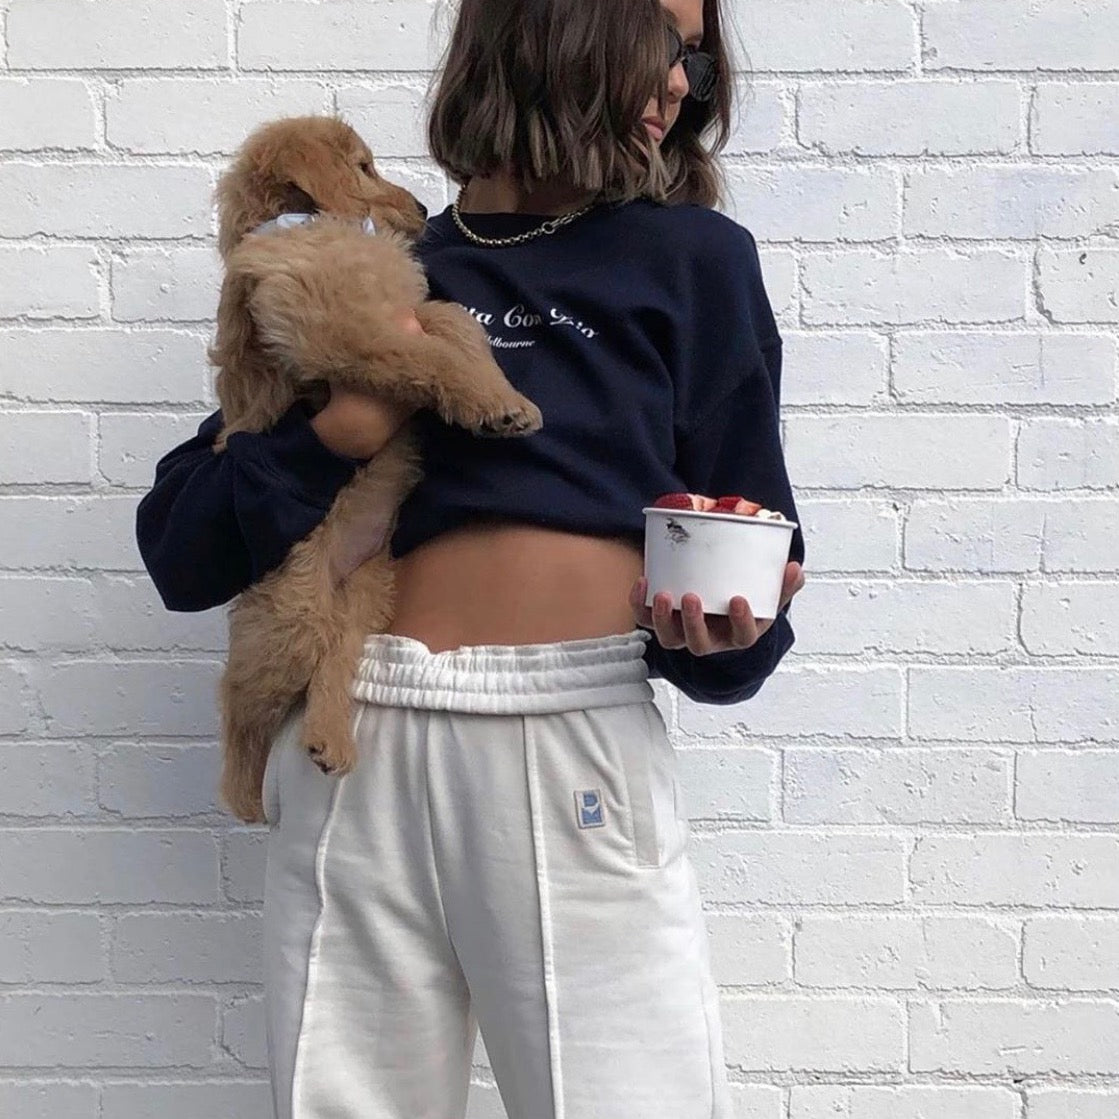 Stylish Woman with Puppy and Acai Bowl